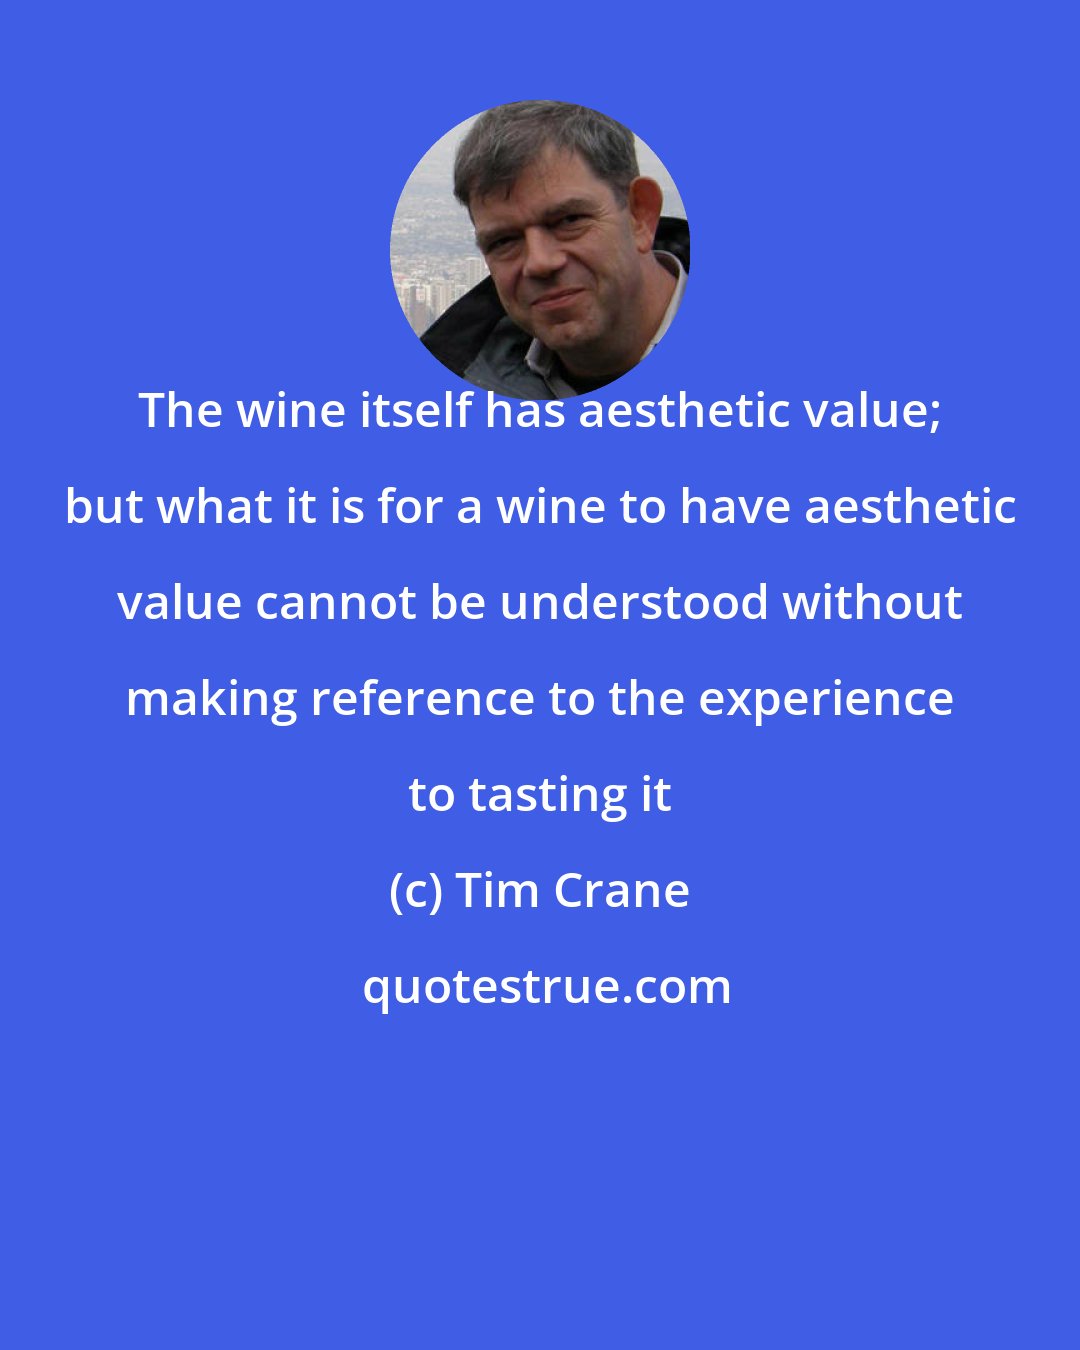 Tim Crane: The wine itself has aesthetic value; but what it is for a wine to have aesthetic value cannot be understood without making reference to the experience to tasting it